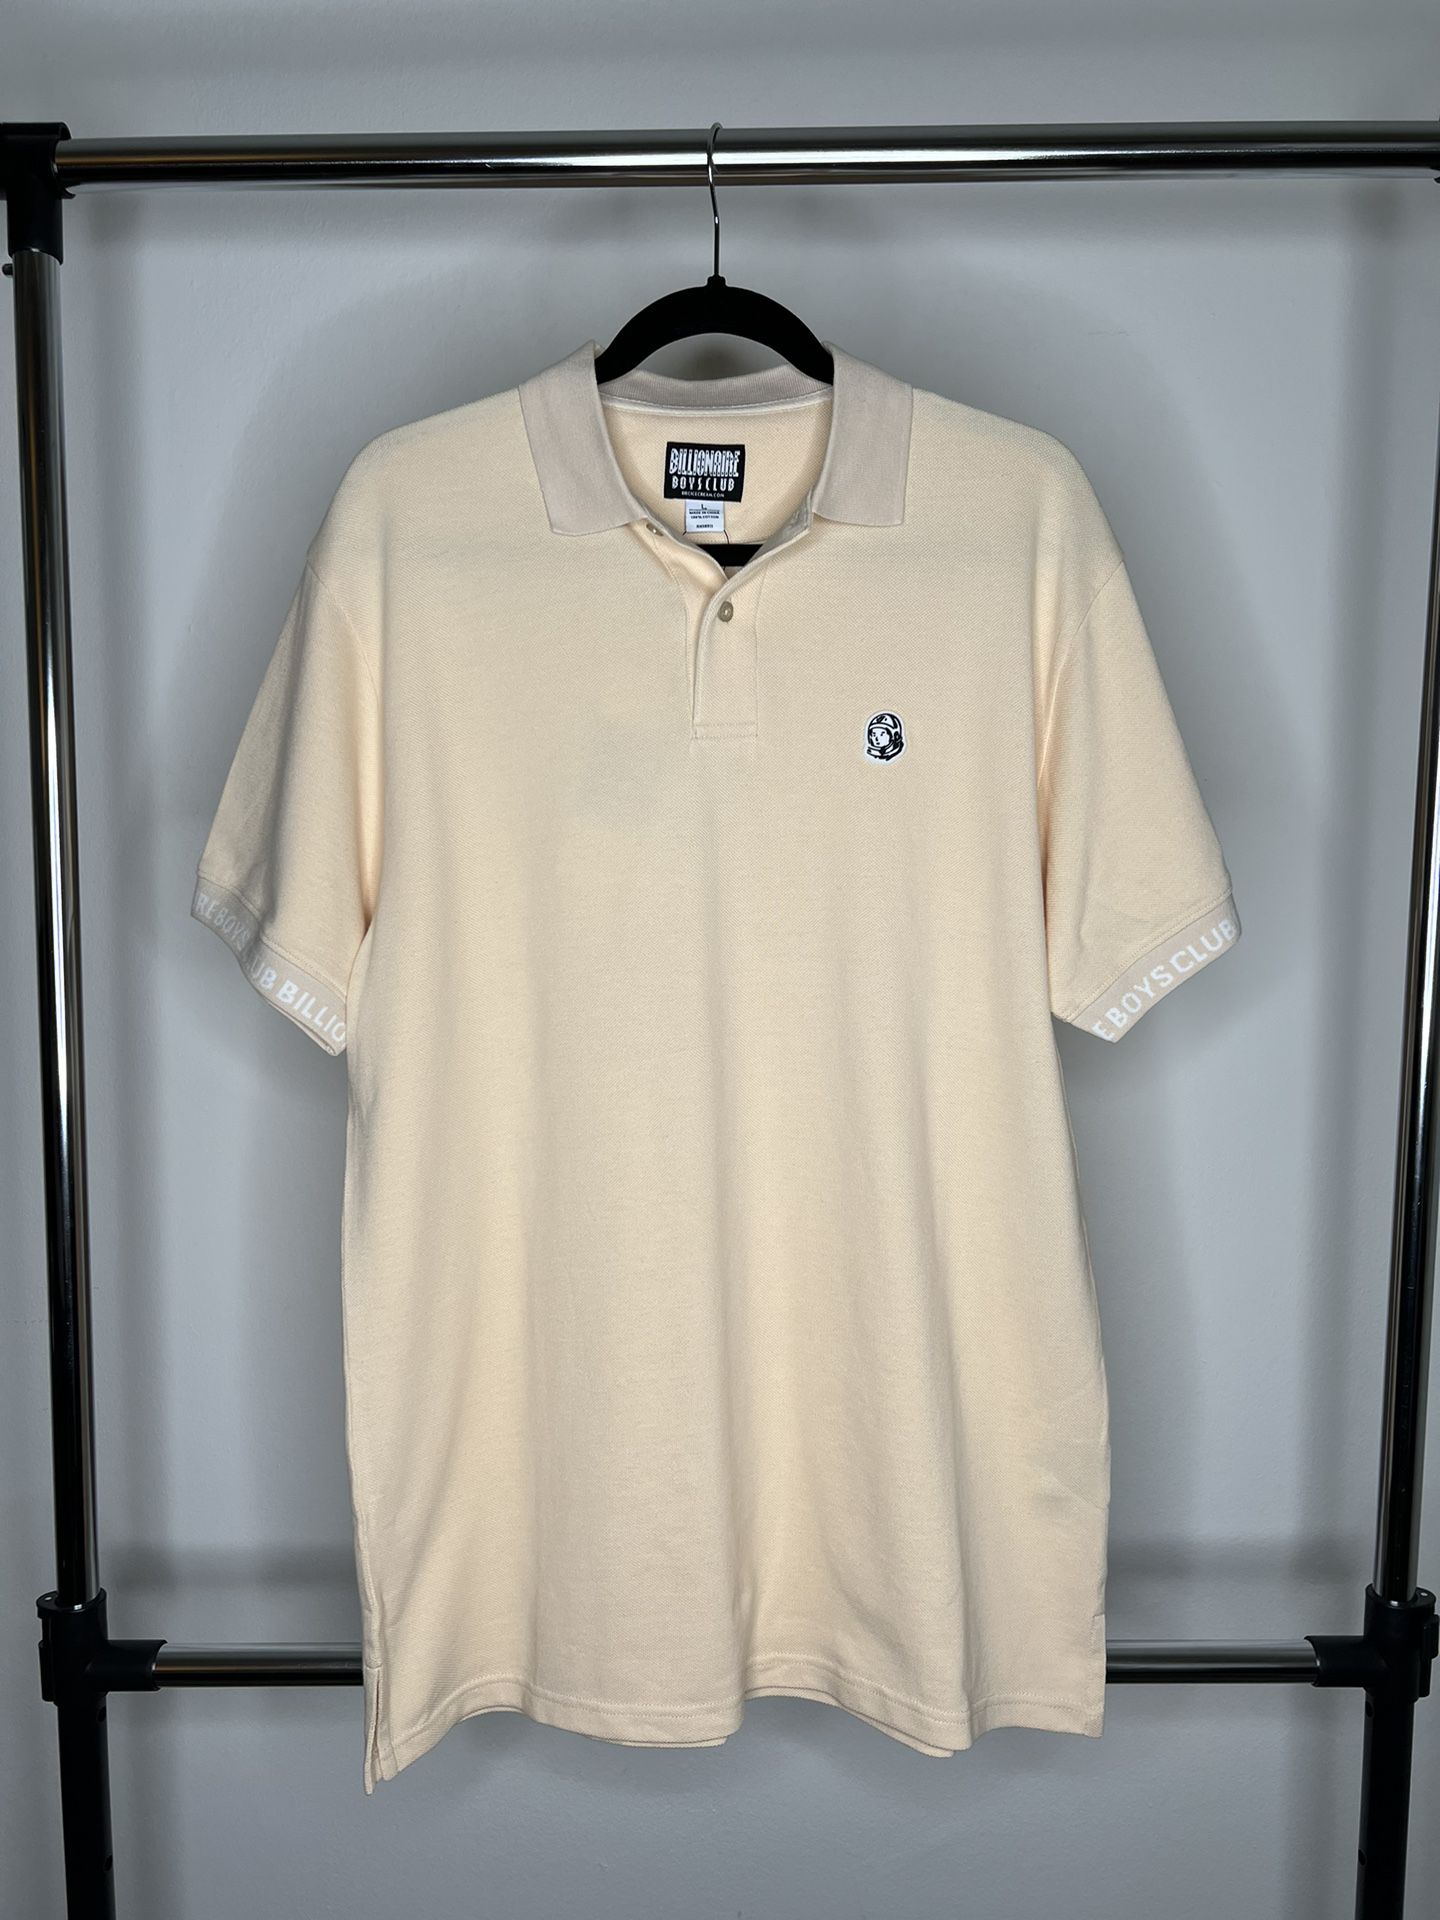 Post Kwijting Gymnast Billionaire Boys Club Short Sleeve Polo (Men's Size Large) BRAND NEW W/TAGS  for Sale in New York, NY - OfferUp